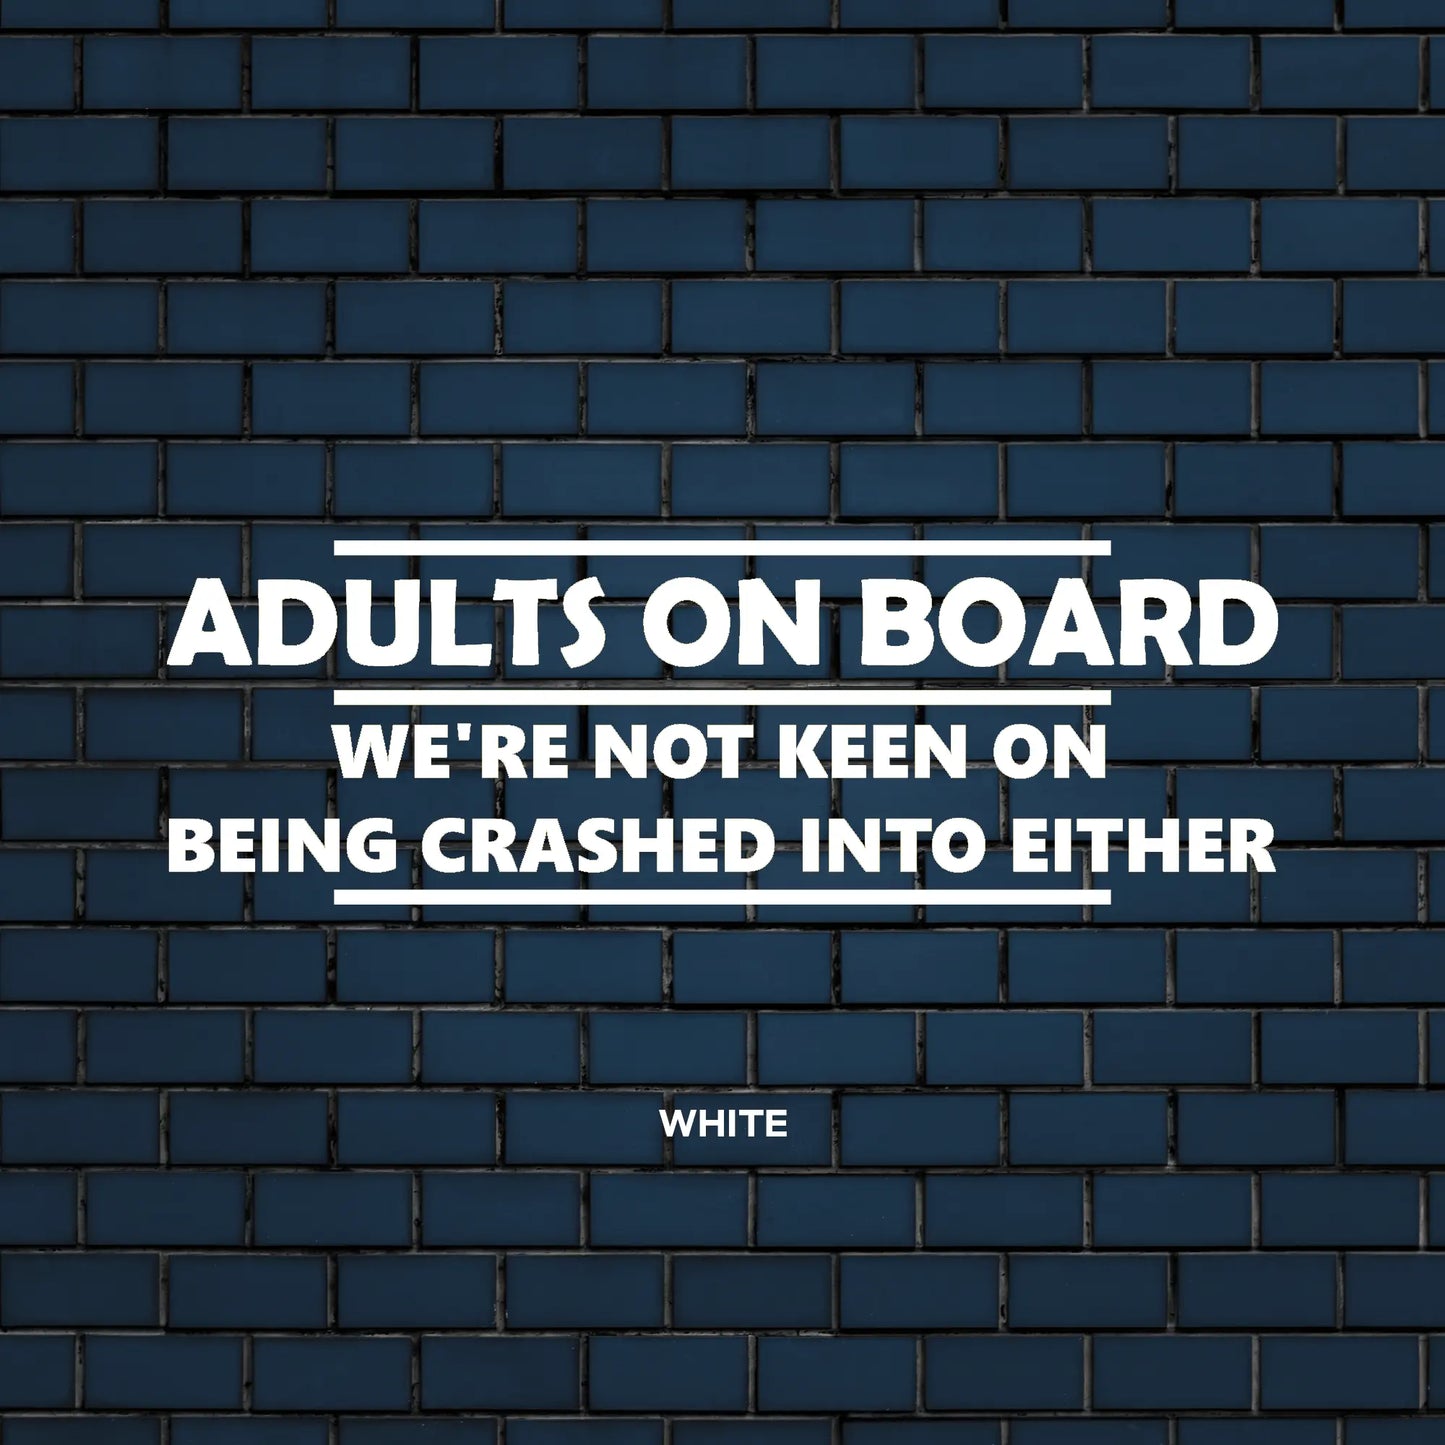 Adults on Board, We're not keen on being crashed into either decal